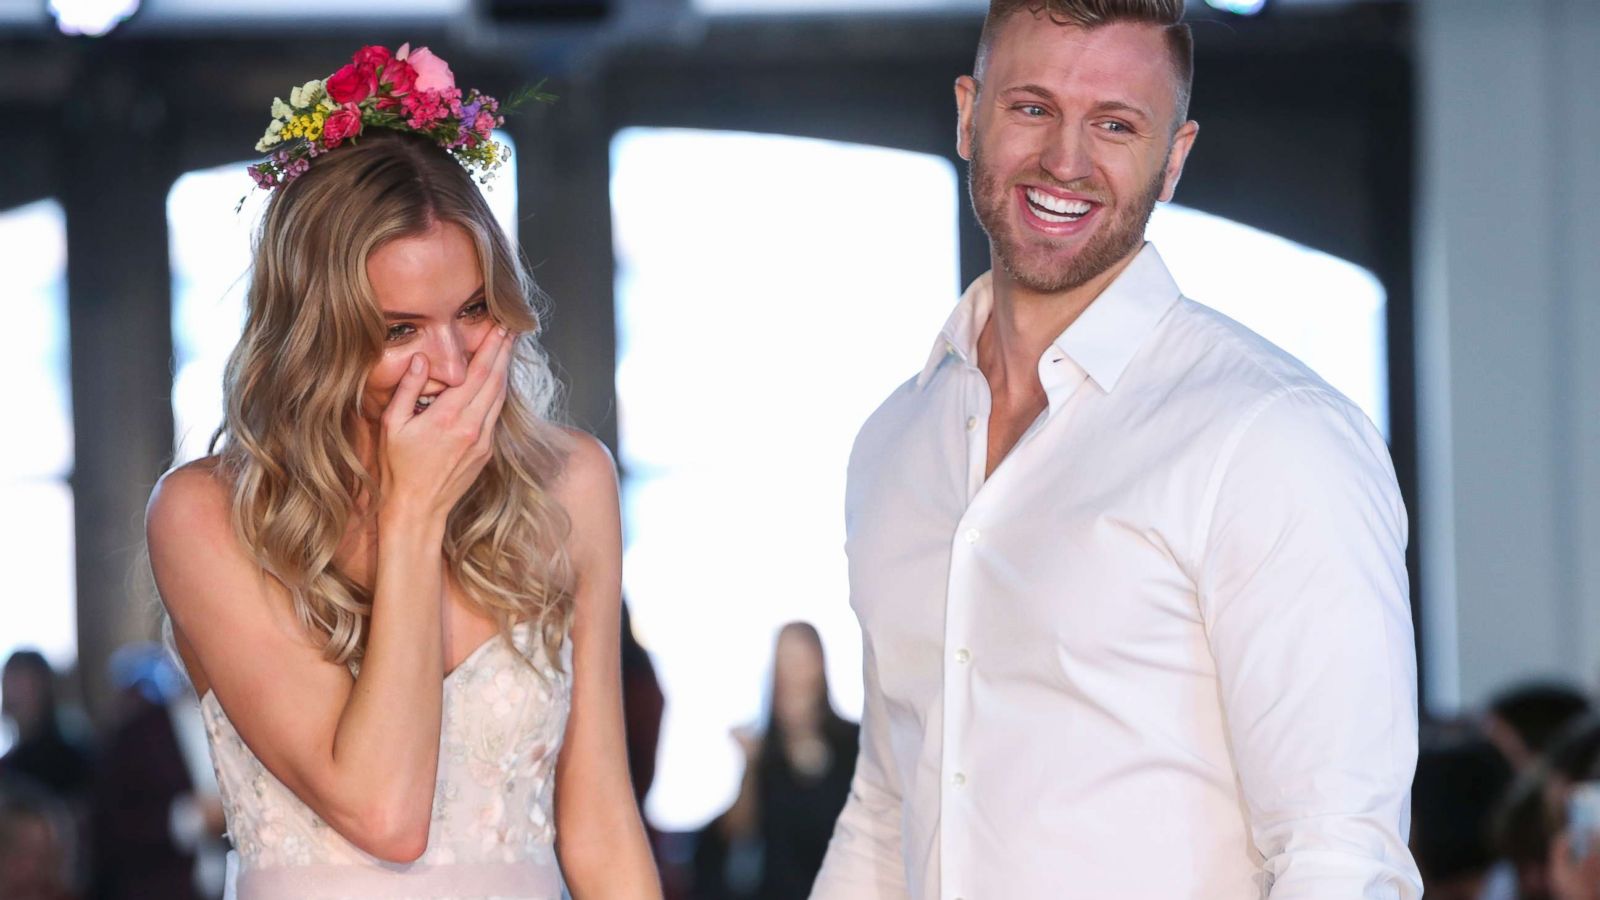 PHOTO: Nicole Kaspar was shocked when her then-boyfriend Chad Stapleton proposed to her during Watters Bridal Spring 2019 fashion show, April 14, 2018.